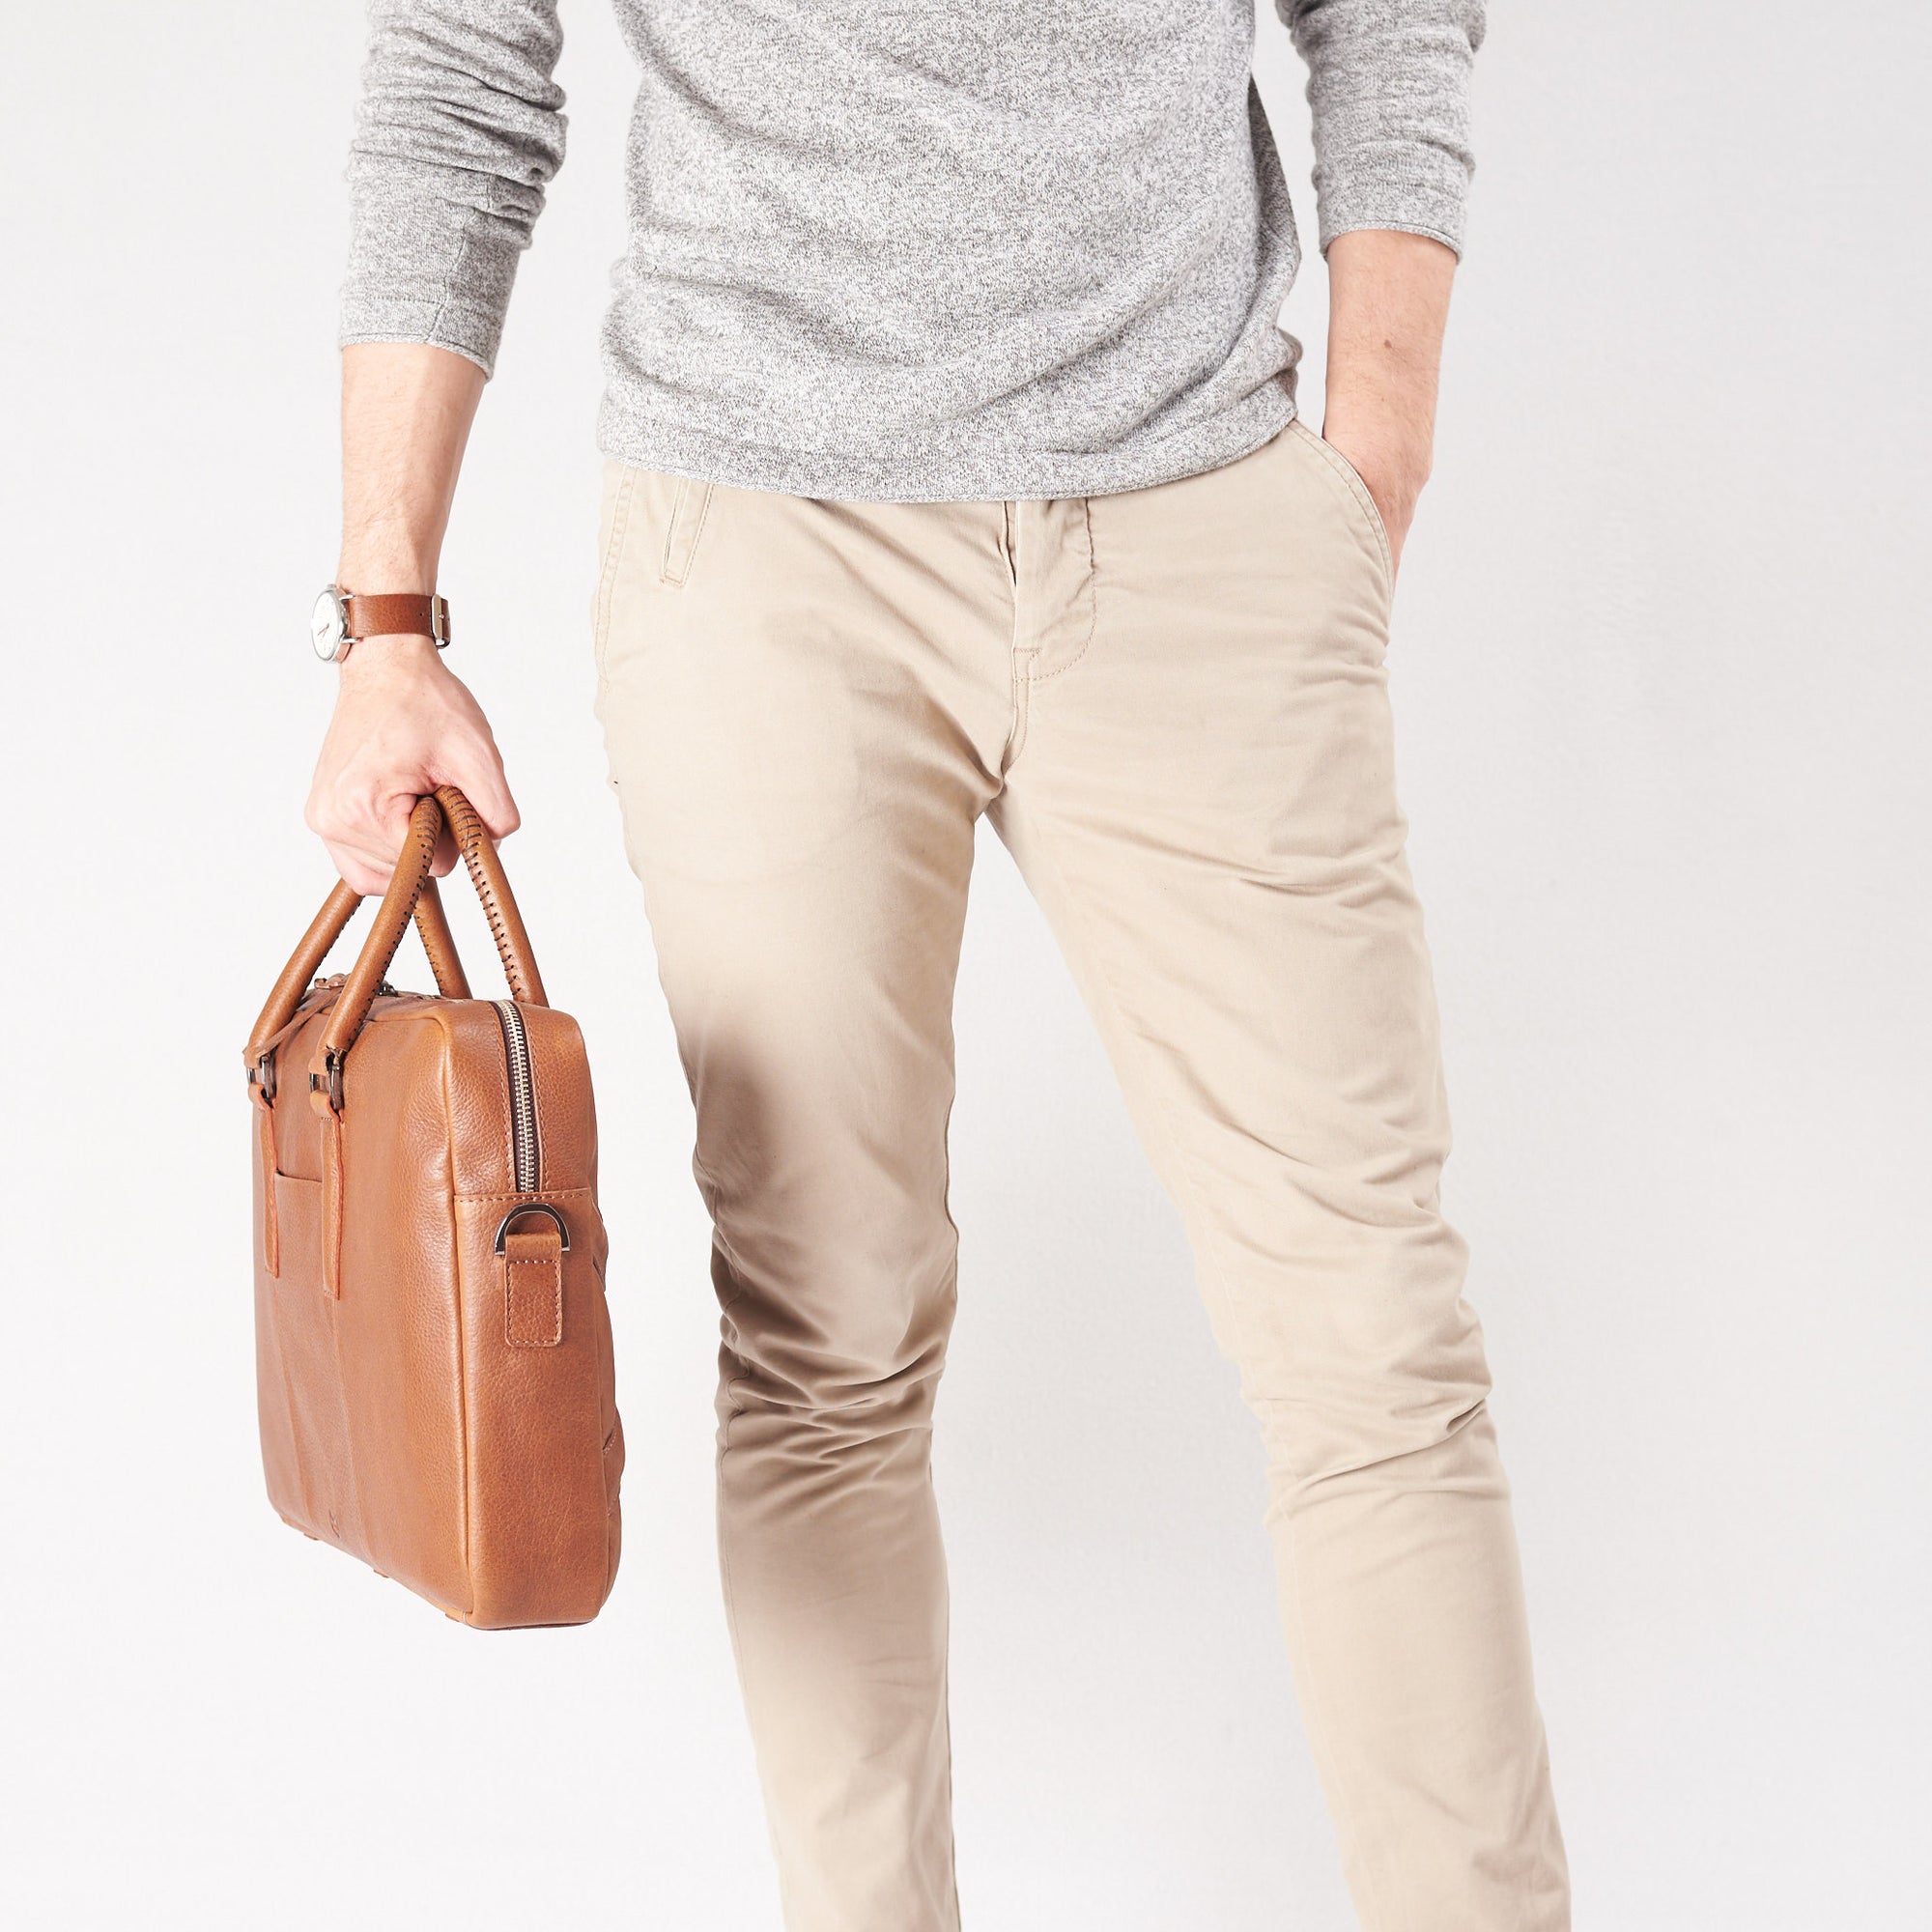 Style view, model holding bussiness document portfolio bag .Tan leather briefcase laptop bag for men. Gazeli laptop briefcase by Capra Leather.